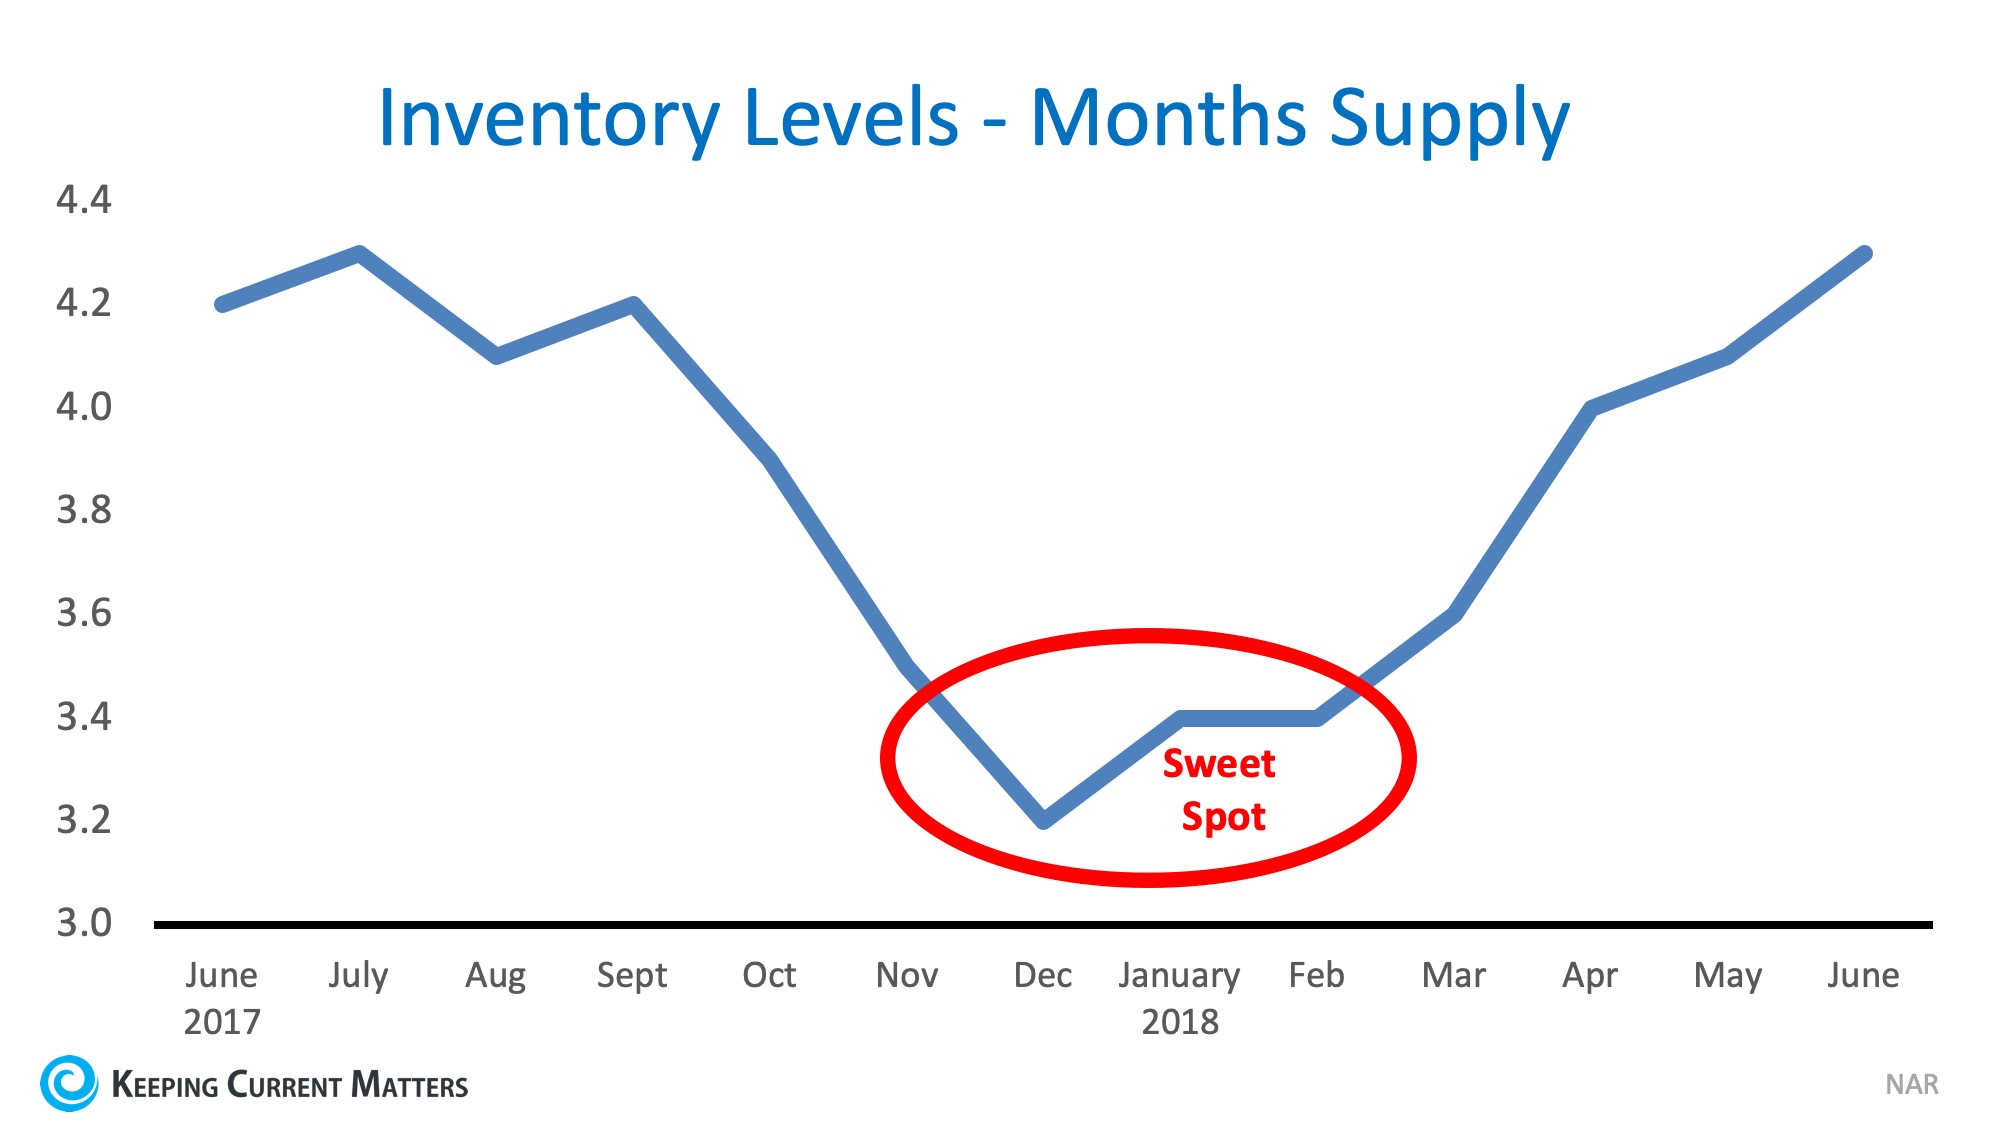 Inventory Levels by Months Supply